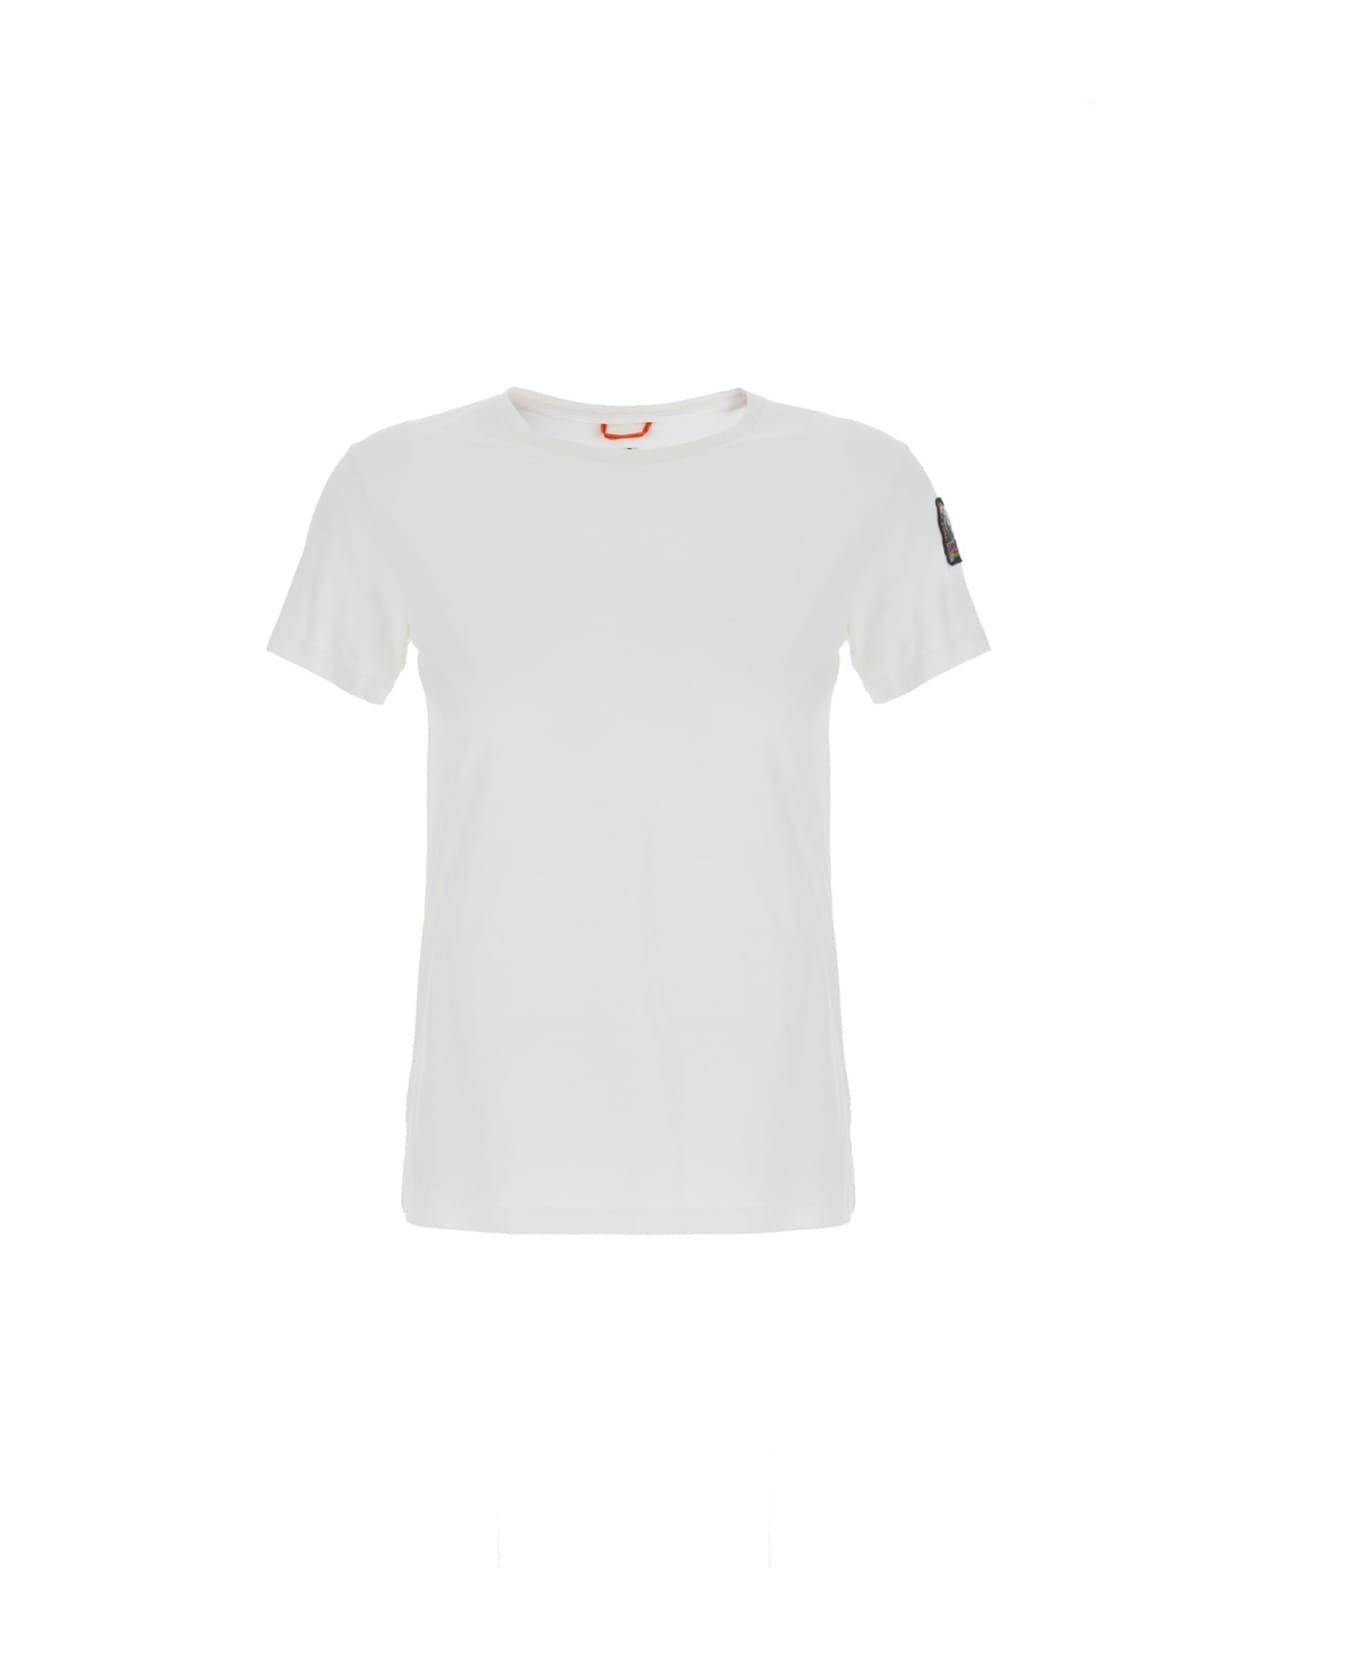 Parajumpers T-shirt 'basic' - White